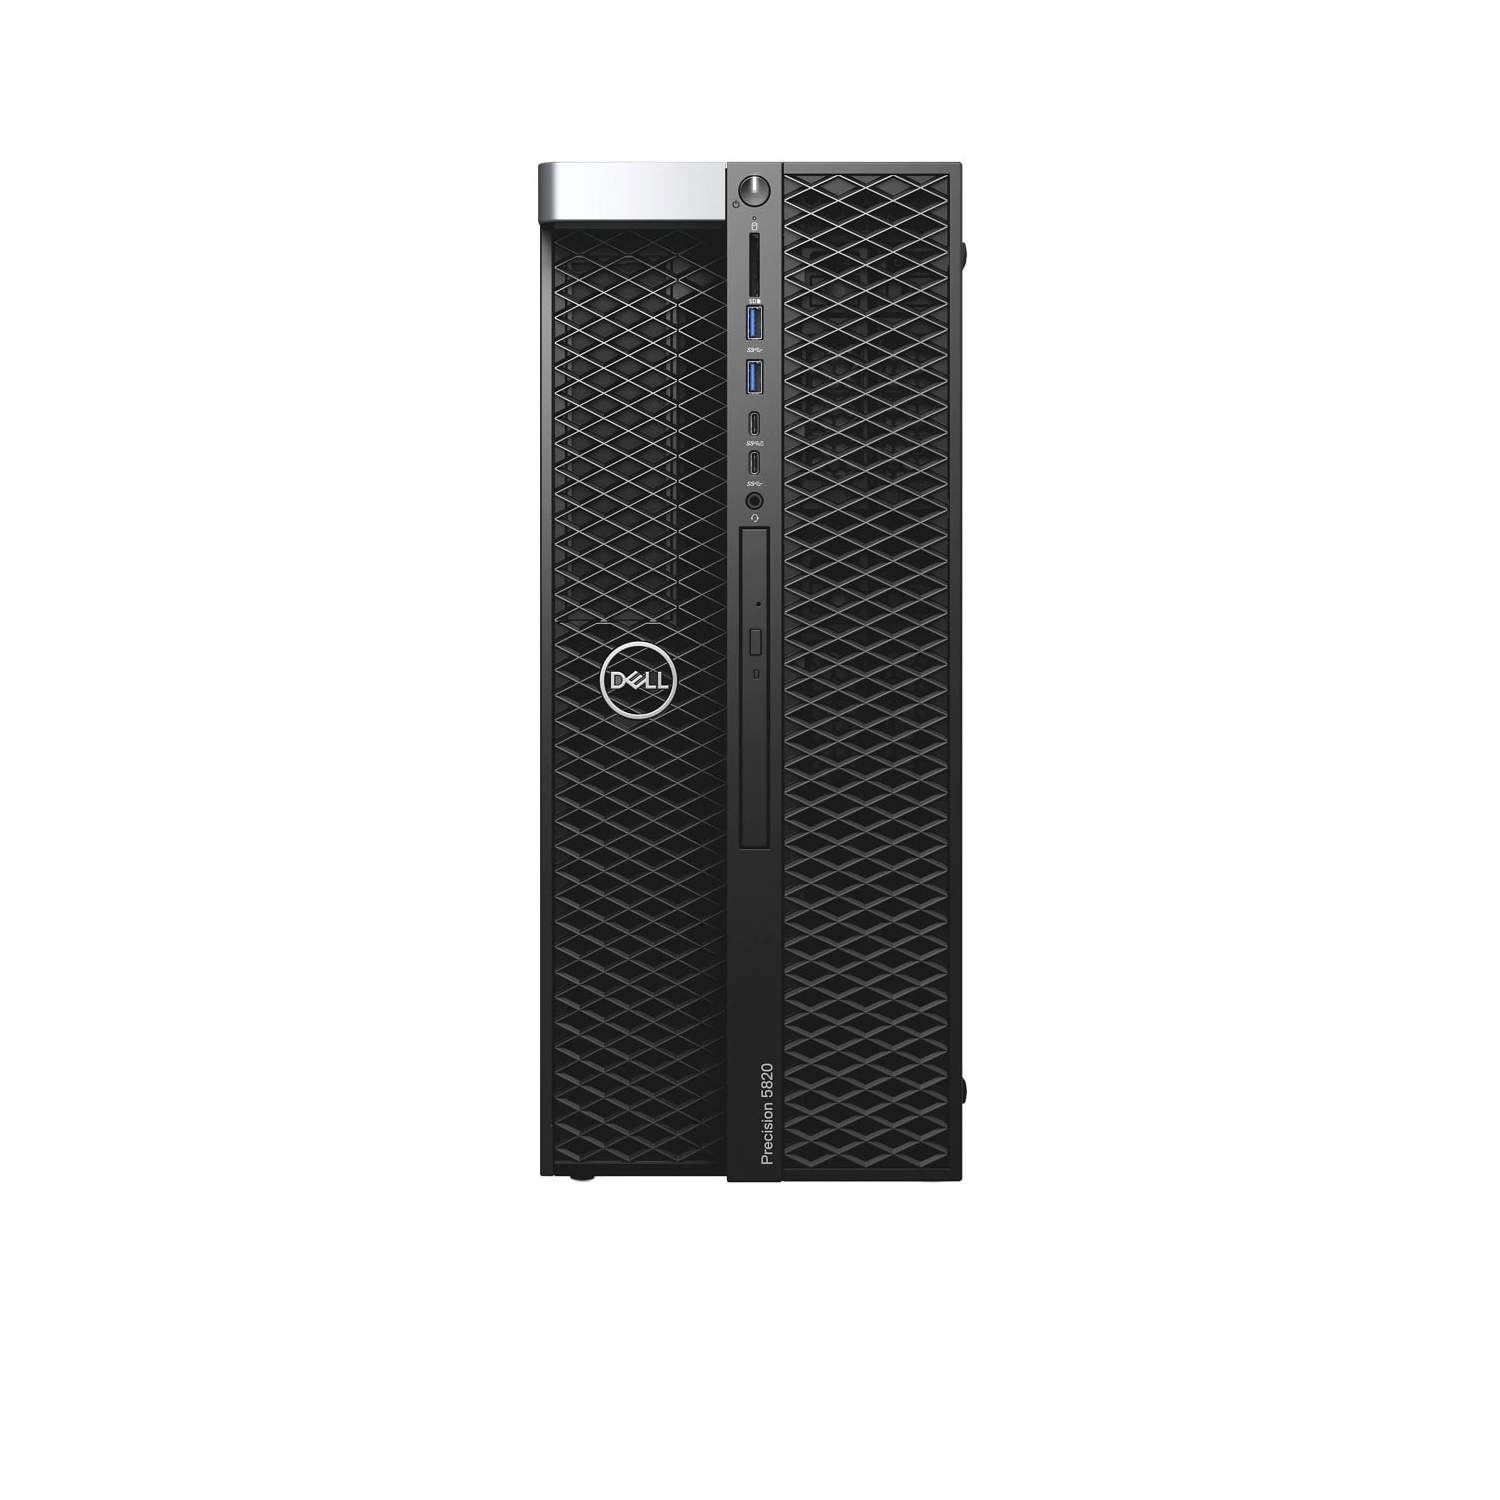 Refurbished (Excellent) - Dell Precision T5820 Workstation Desktop (2018) | Core Xeon W - 1TB SSD - 16GB RAM - RTX 3090 | 6 Cores @ 4.6 GHz Certified Refurbished